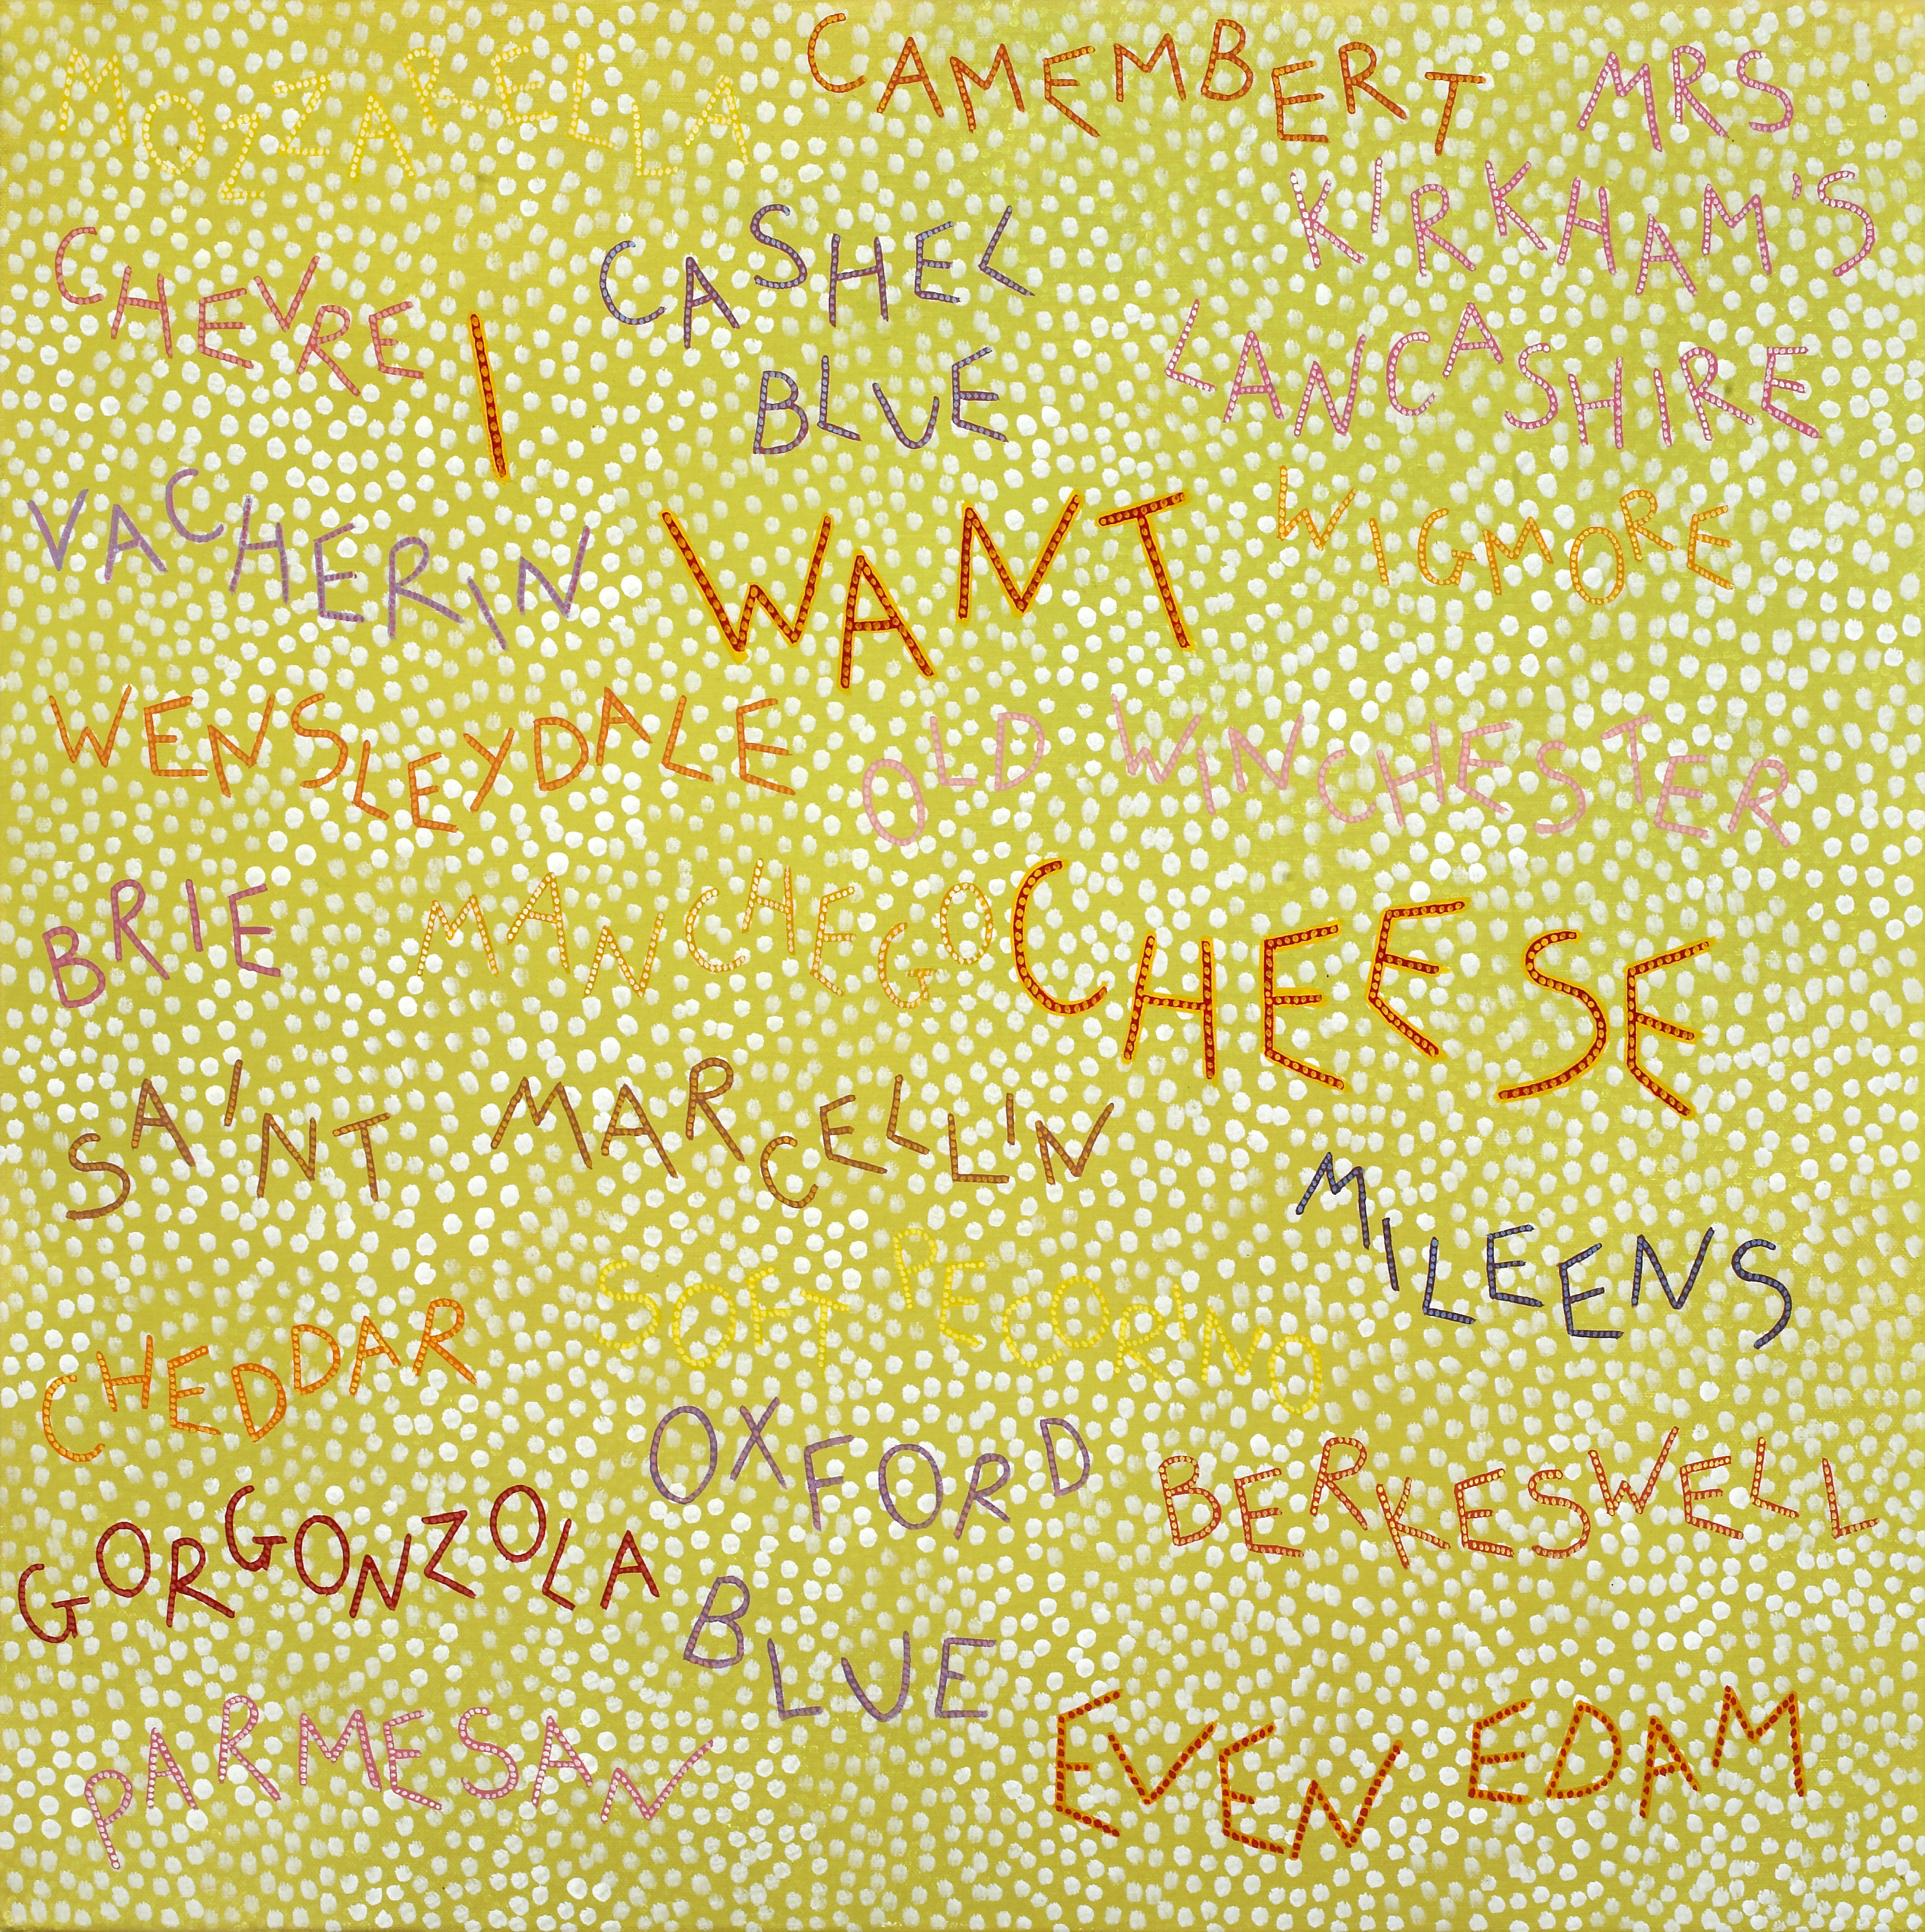 Rachel McDonnell, I Want Cheese, The Auction Collective